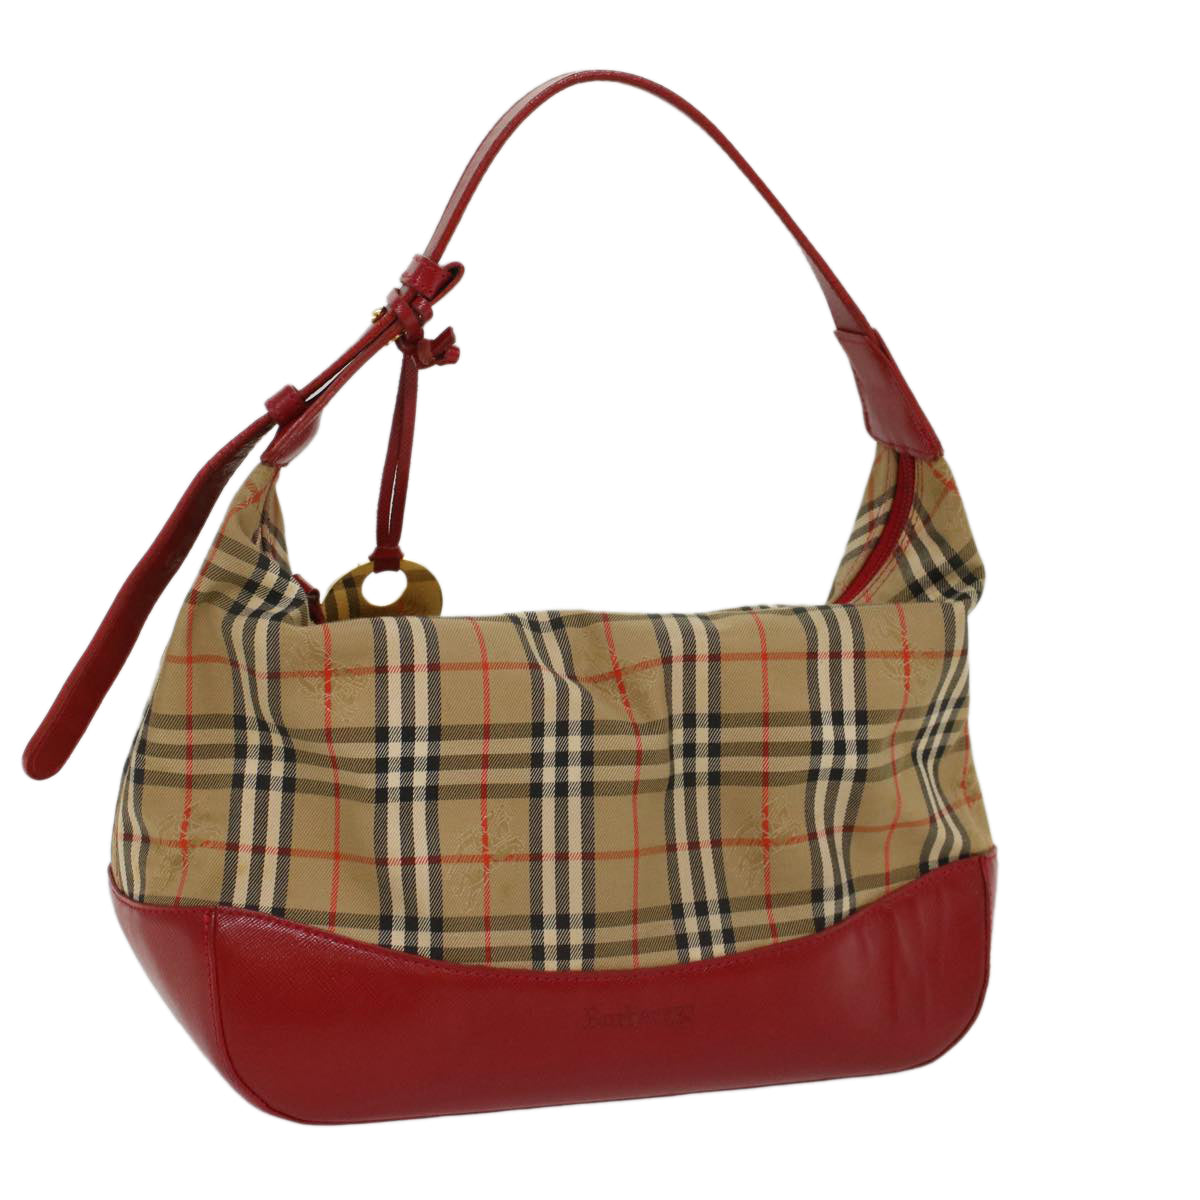 Burberrys Nova Check Hand Bag Canvas Leather Beige Red Auth 53395